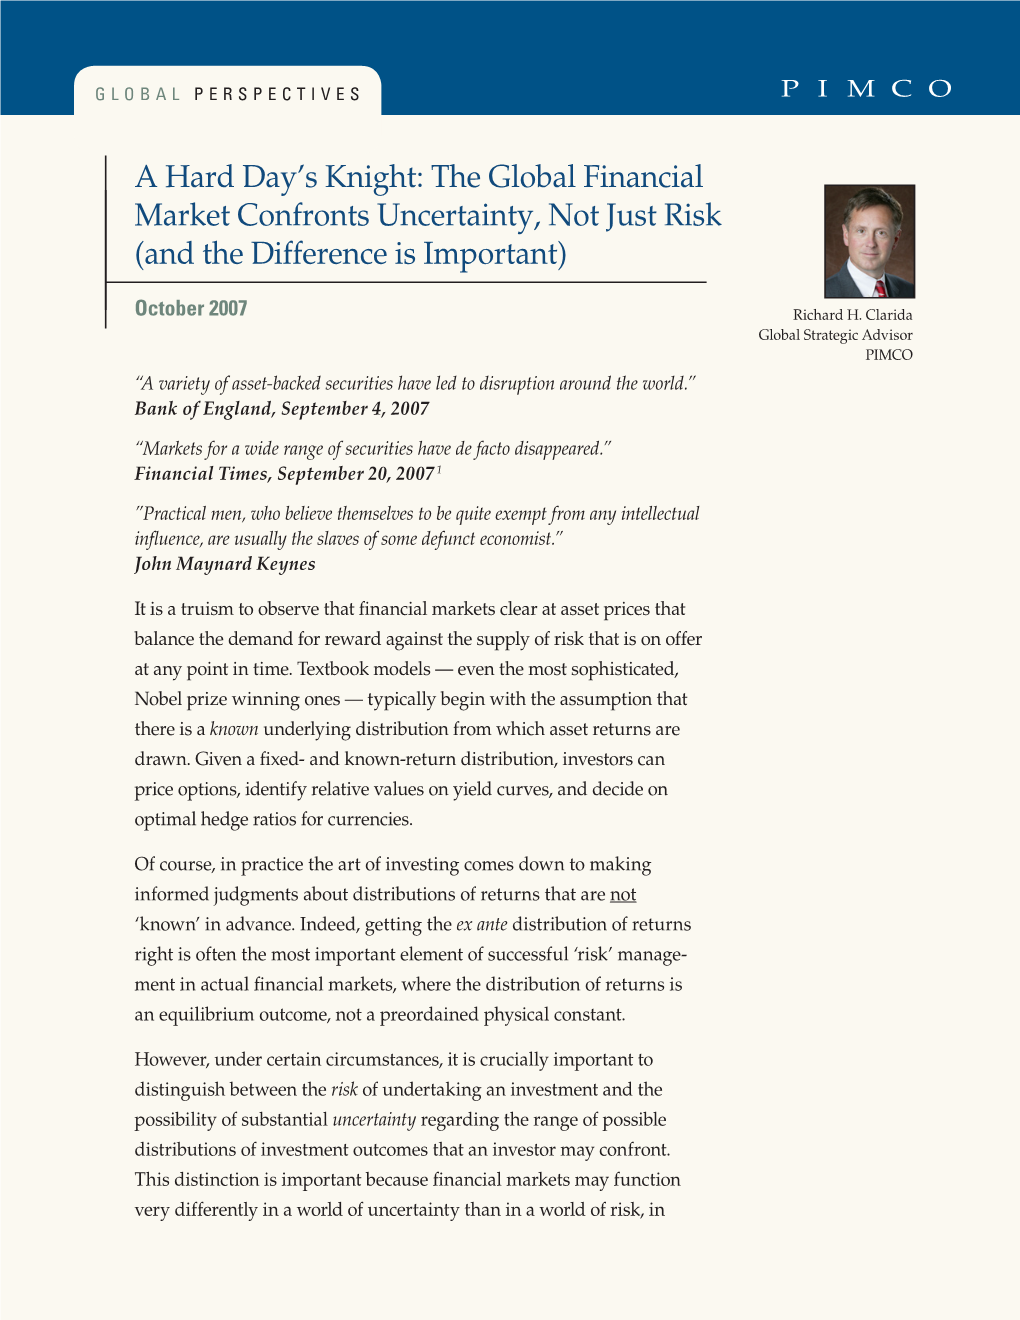 A Hard Day's Knight: the Global Financial Market Confronts